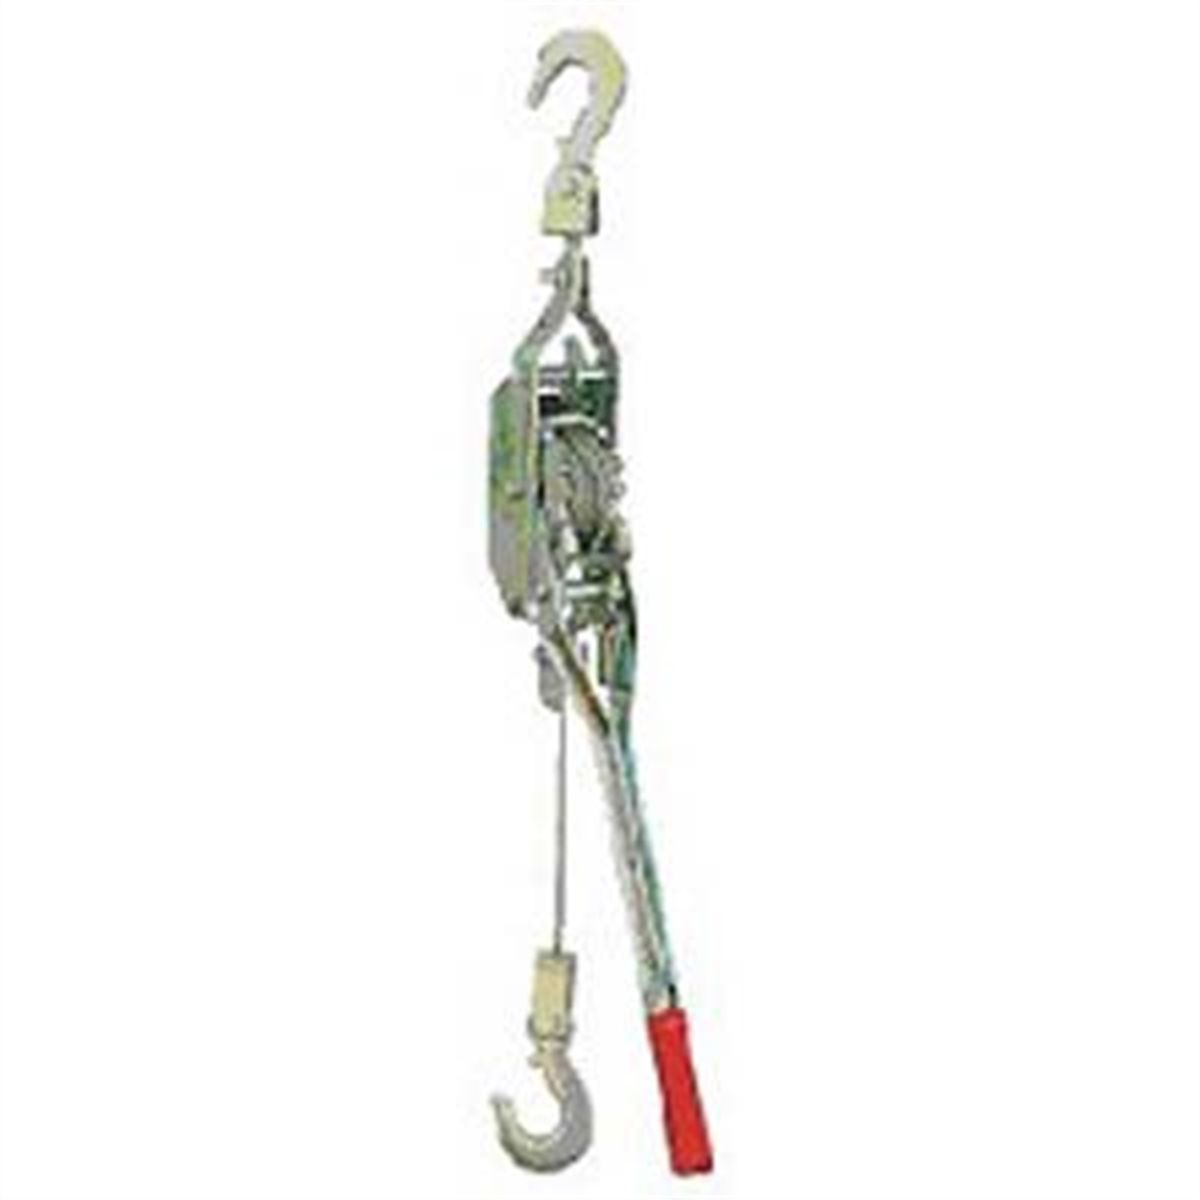 1 TON HAND COME A LONG RATCHET WINCH POWER PULLER HOIST CABLE TOOL HP-114 